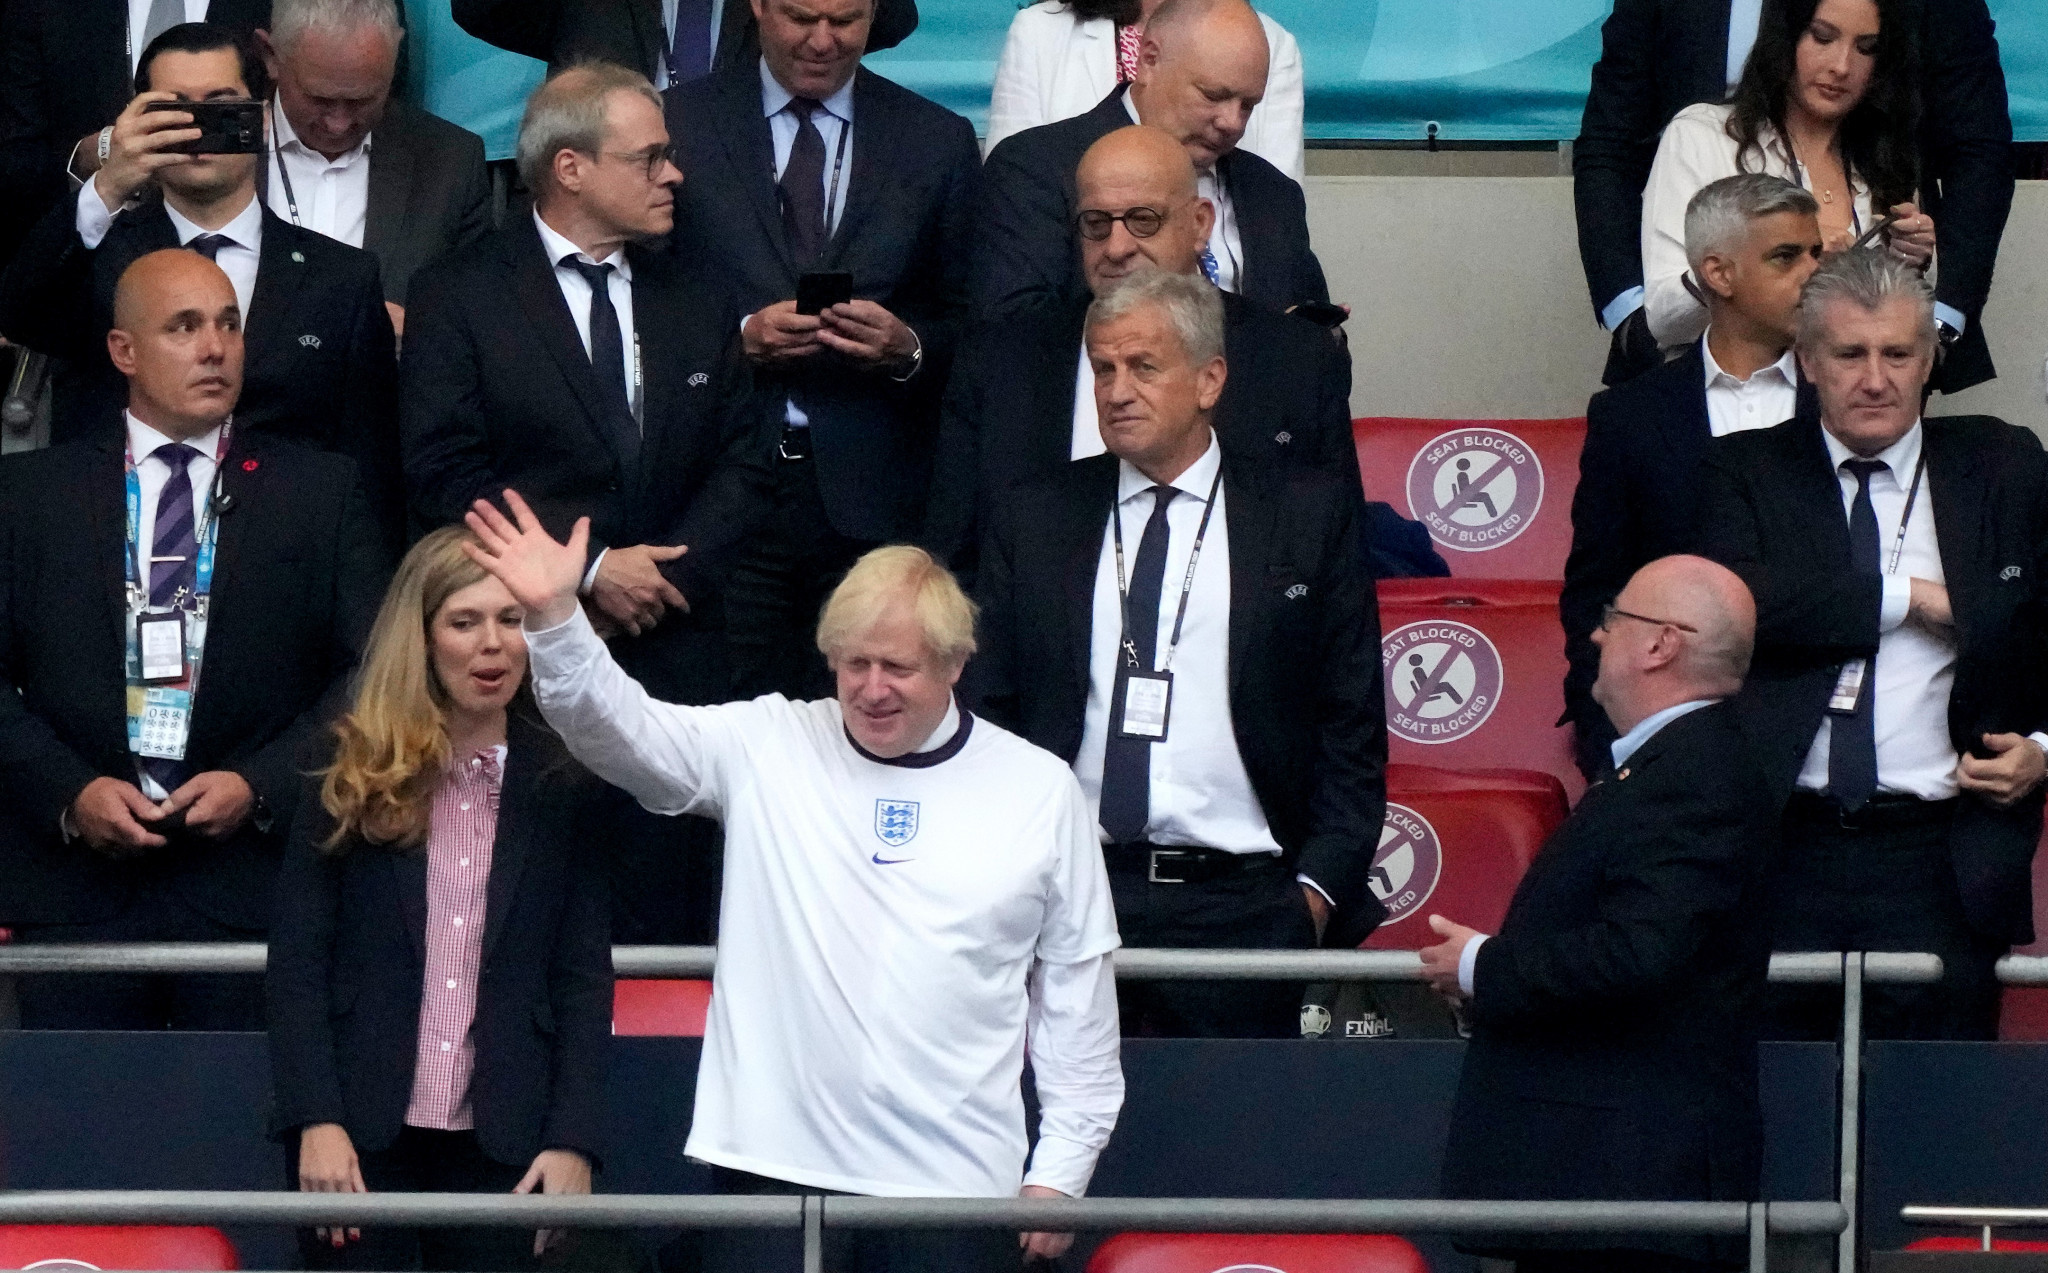 British Prime Minister Boris Johnson is backing the five-nation bid to stage the 2030 FIFA World Cup ©Getty Images